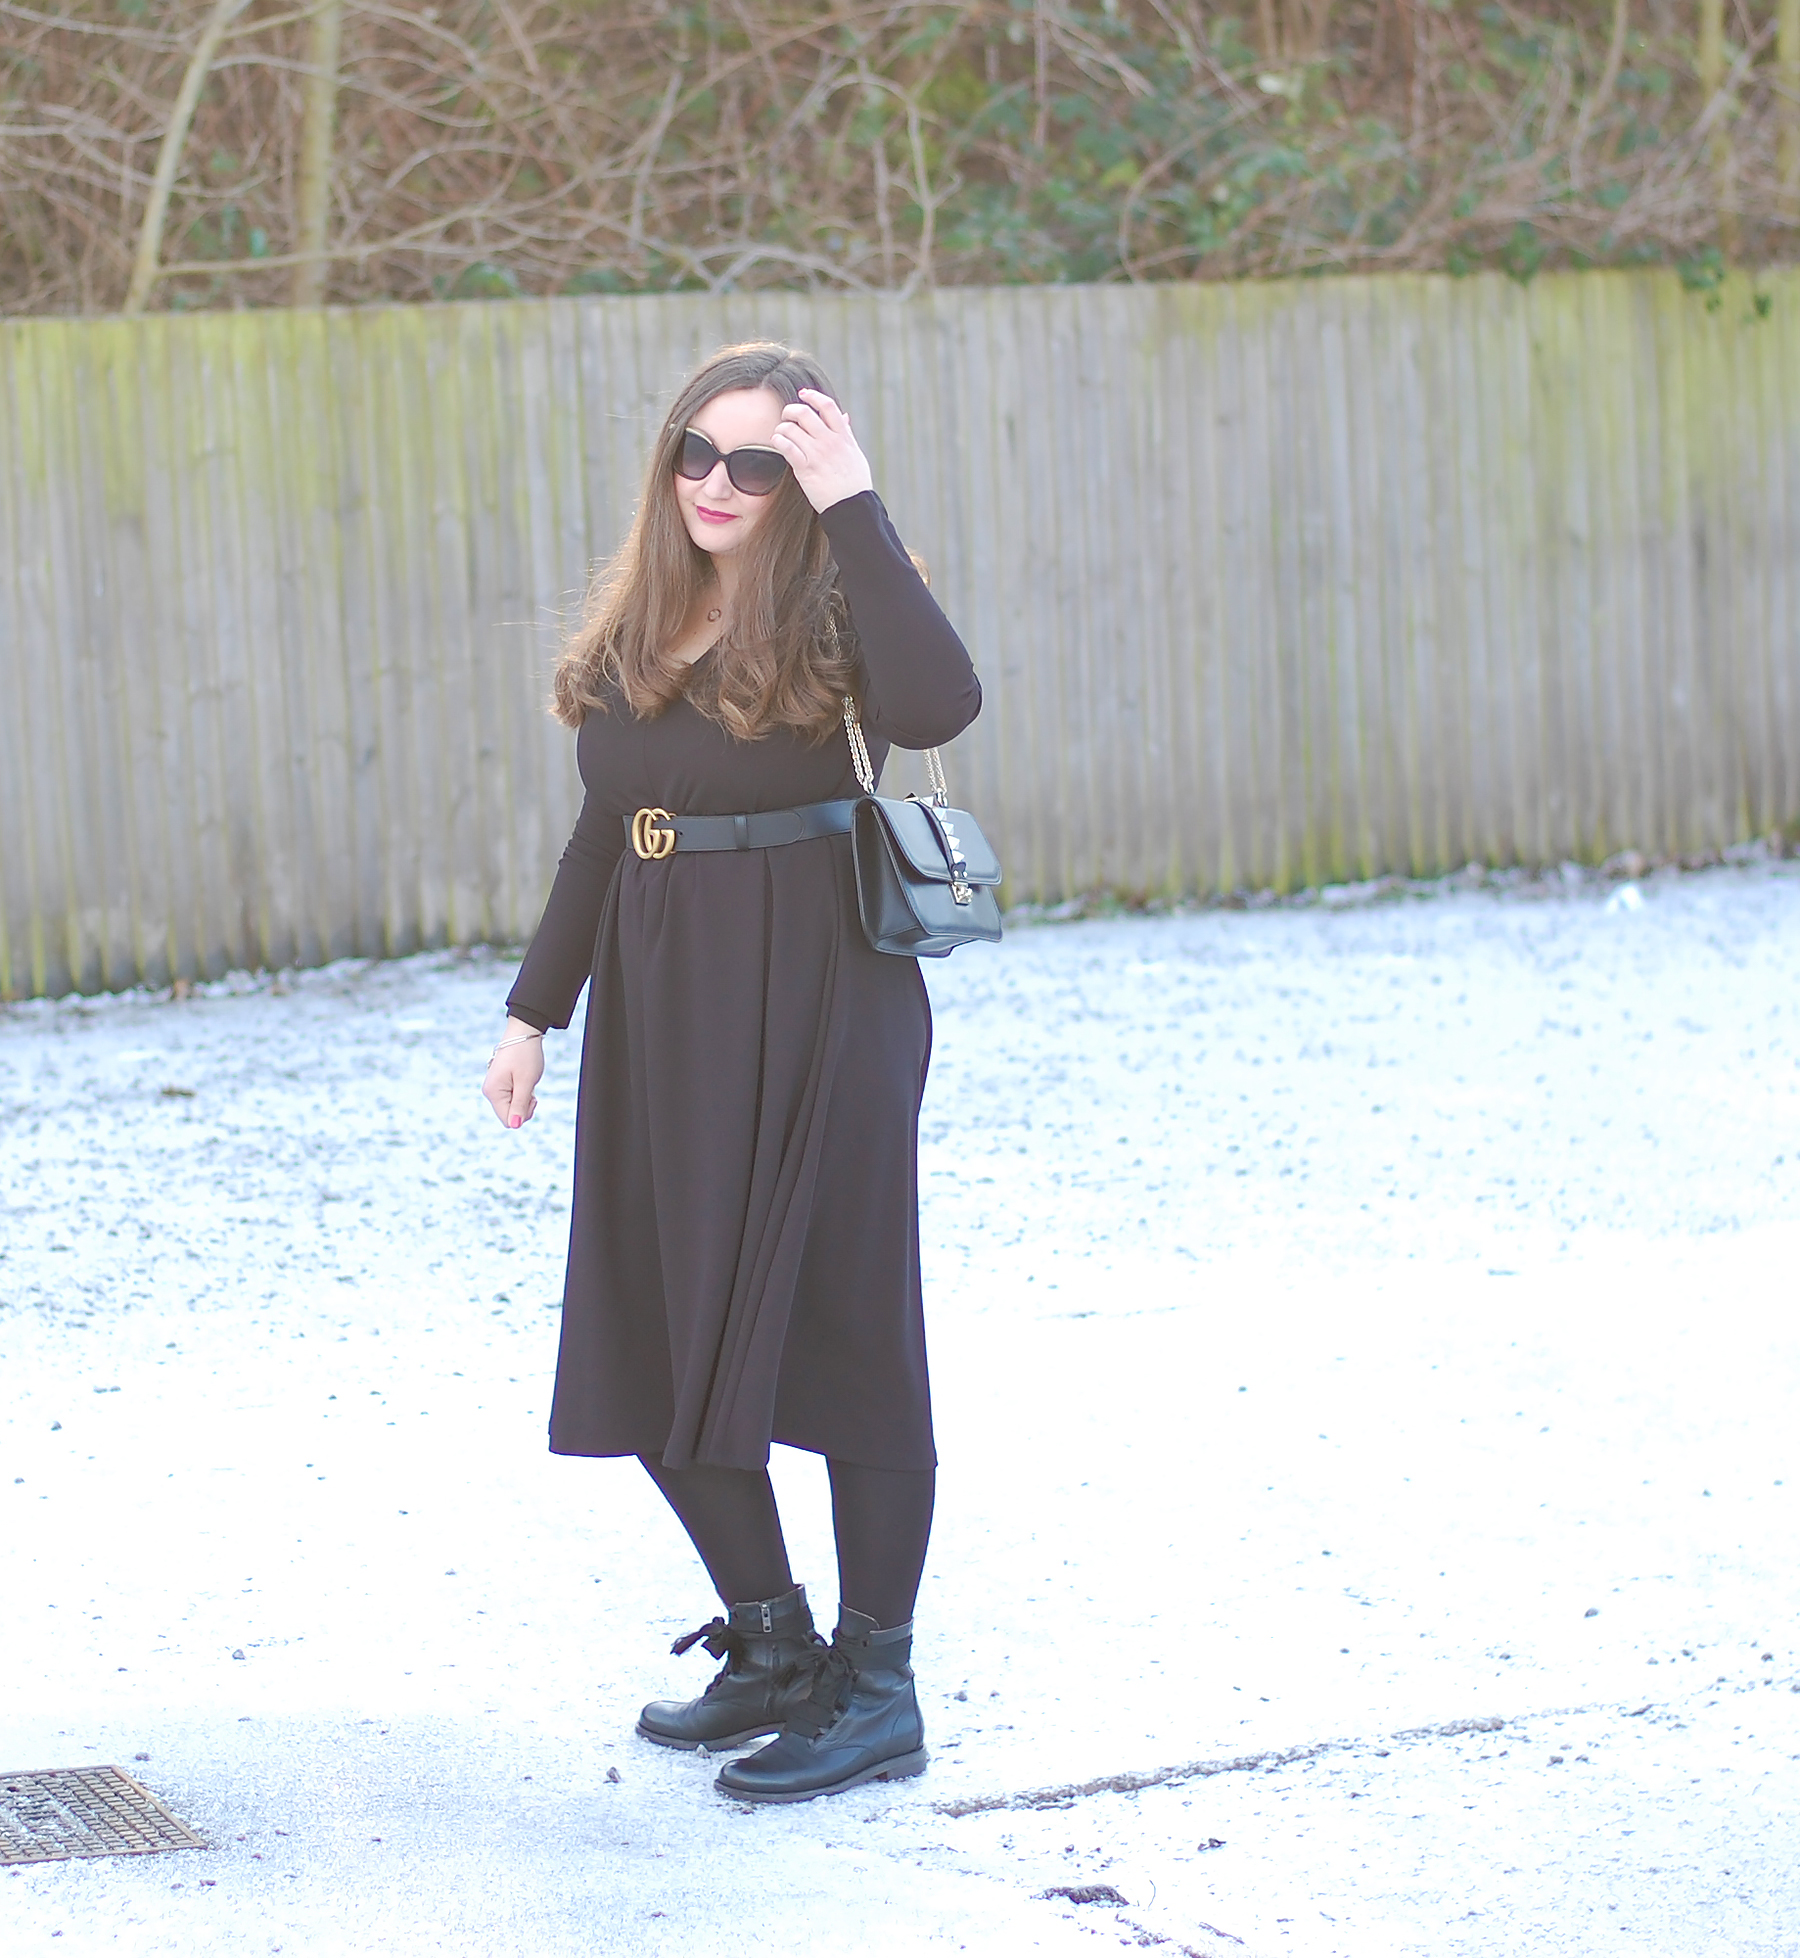 Lace up Boots with a midi dress outfit